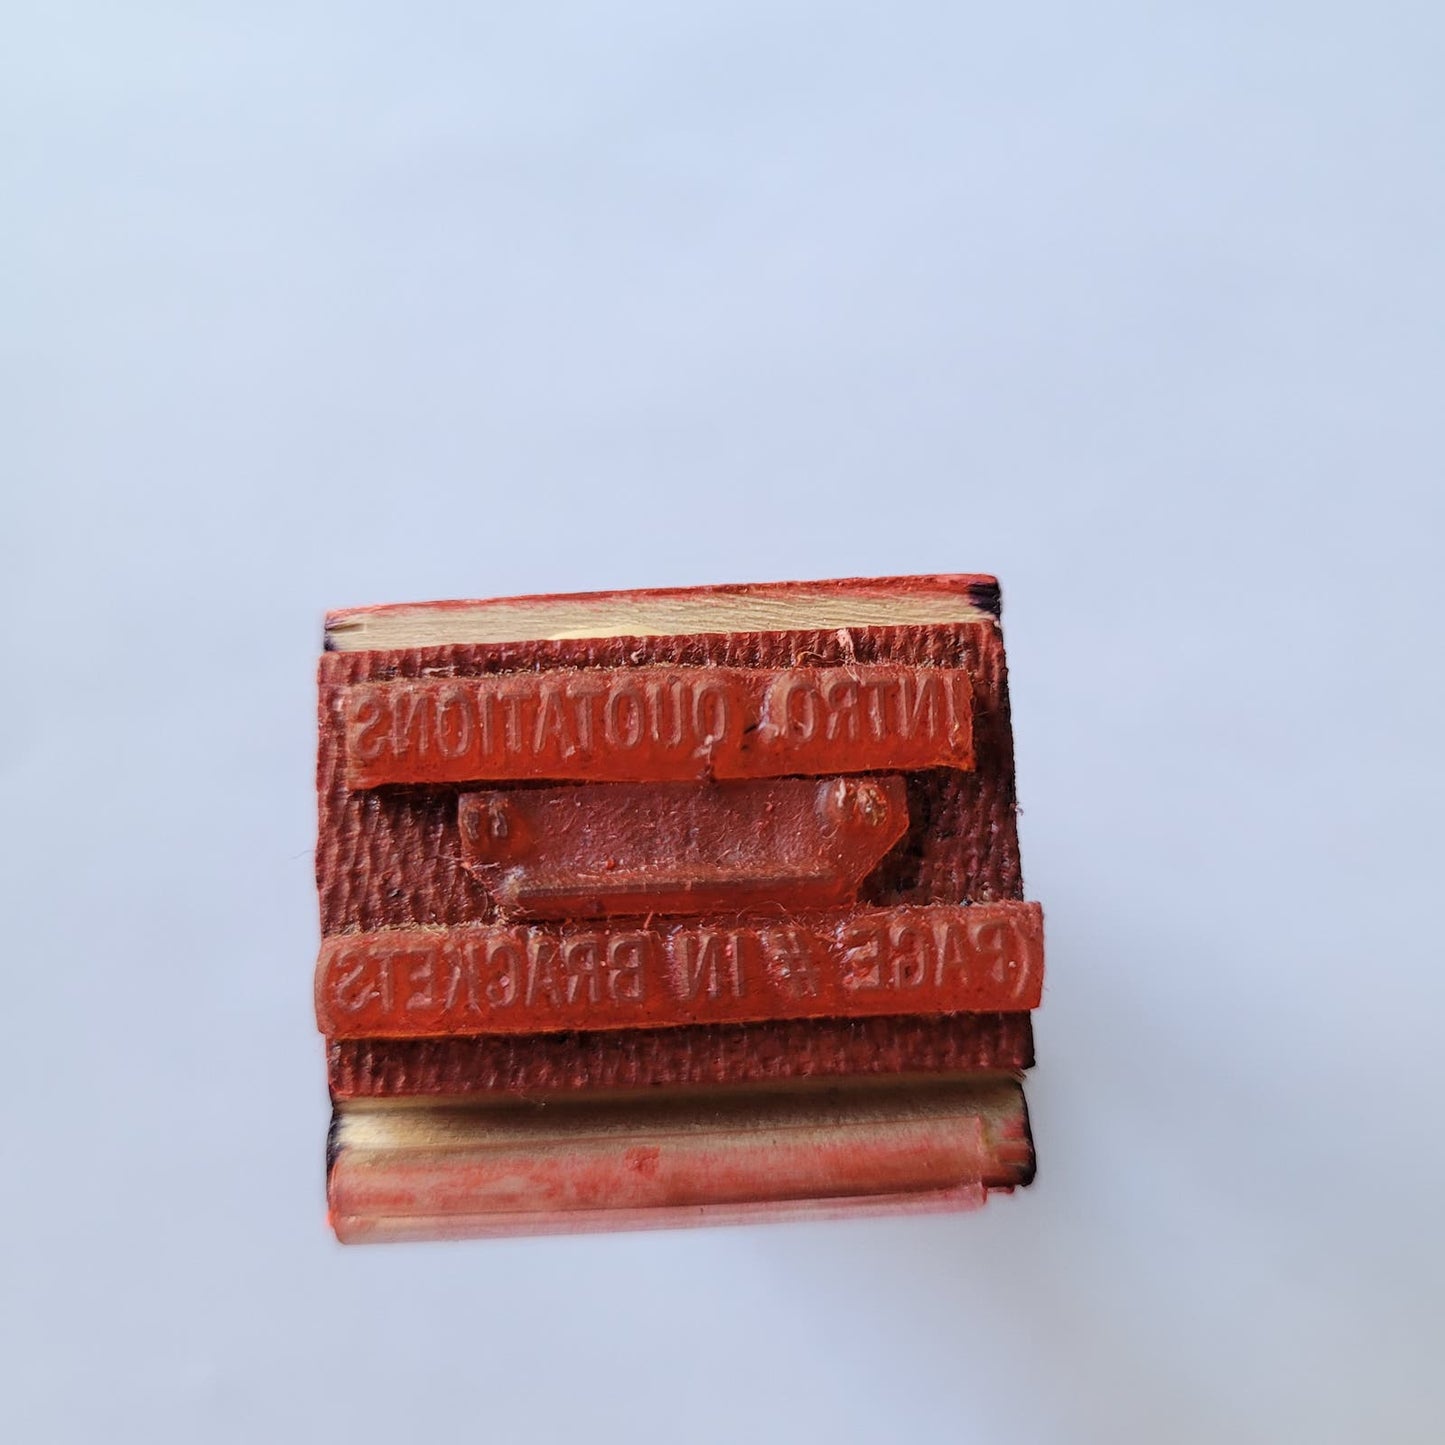 Vintage ACME Rubber Stamp - Intro. Quations "_____" Page # in Brackets